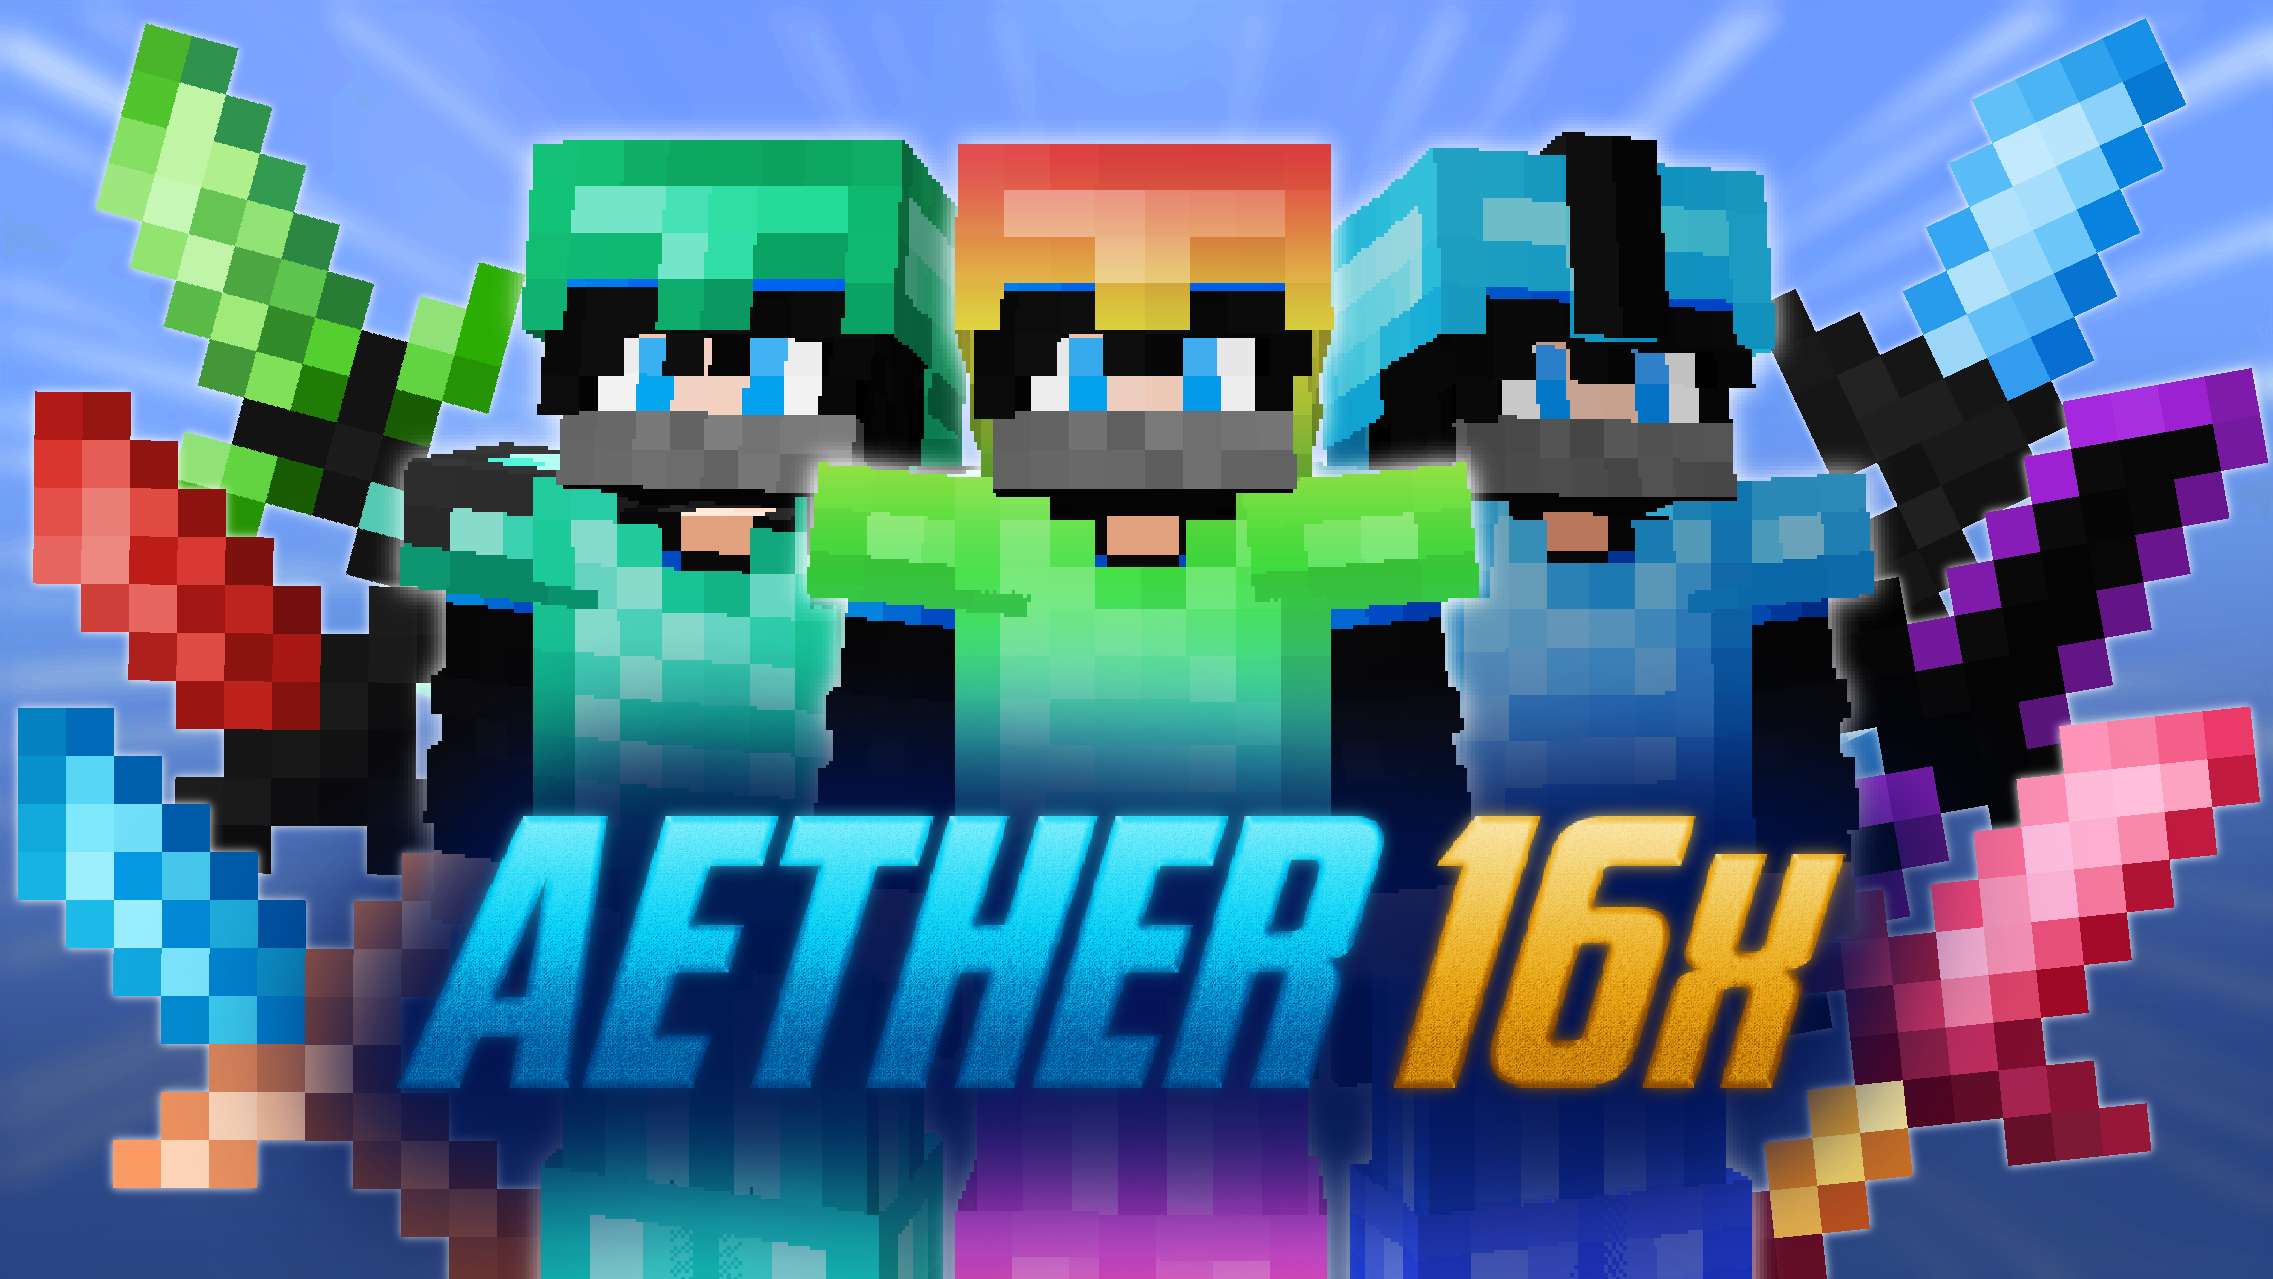 Aether 16x [Jona] 16 by Mqryo on PvPRP